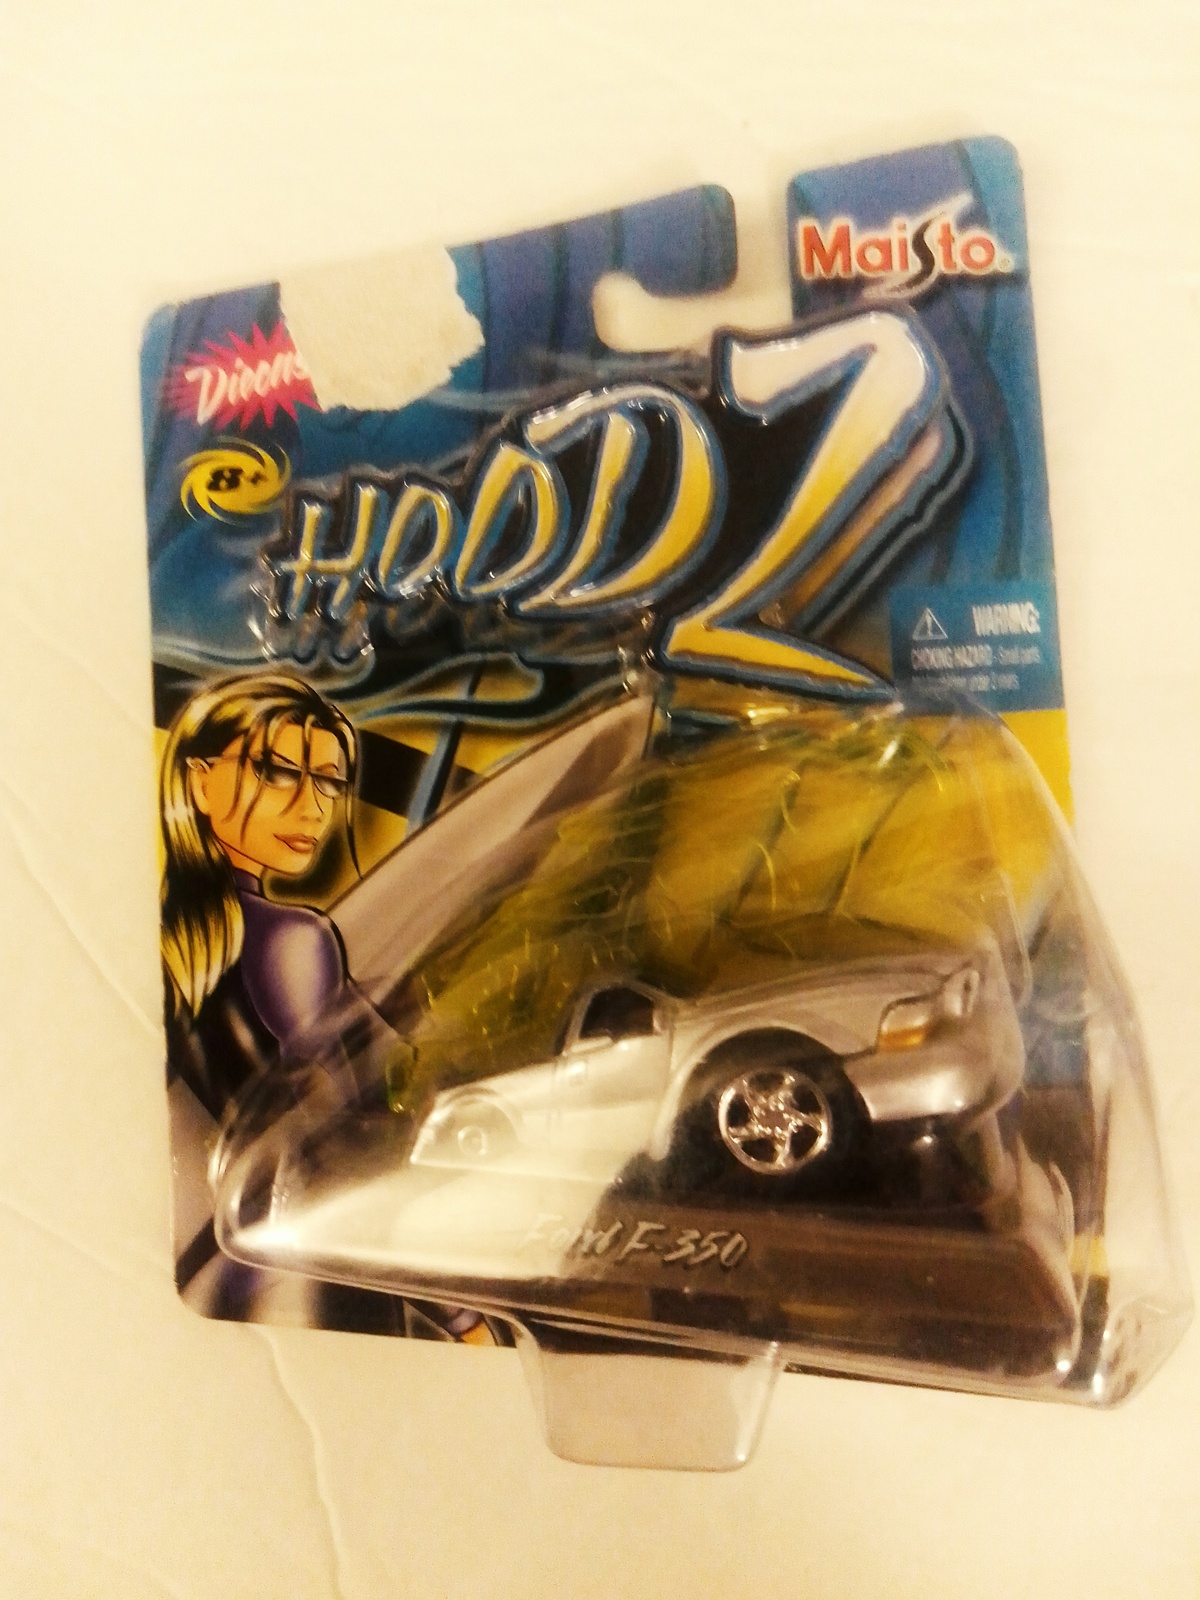 Maisto 2004 Hoodz Silver Ford F-350 Die Cast Vehicle With Exaggerated Hood MOC - $9.99